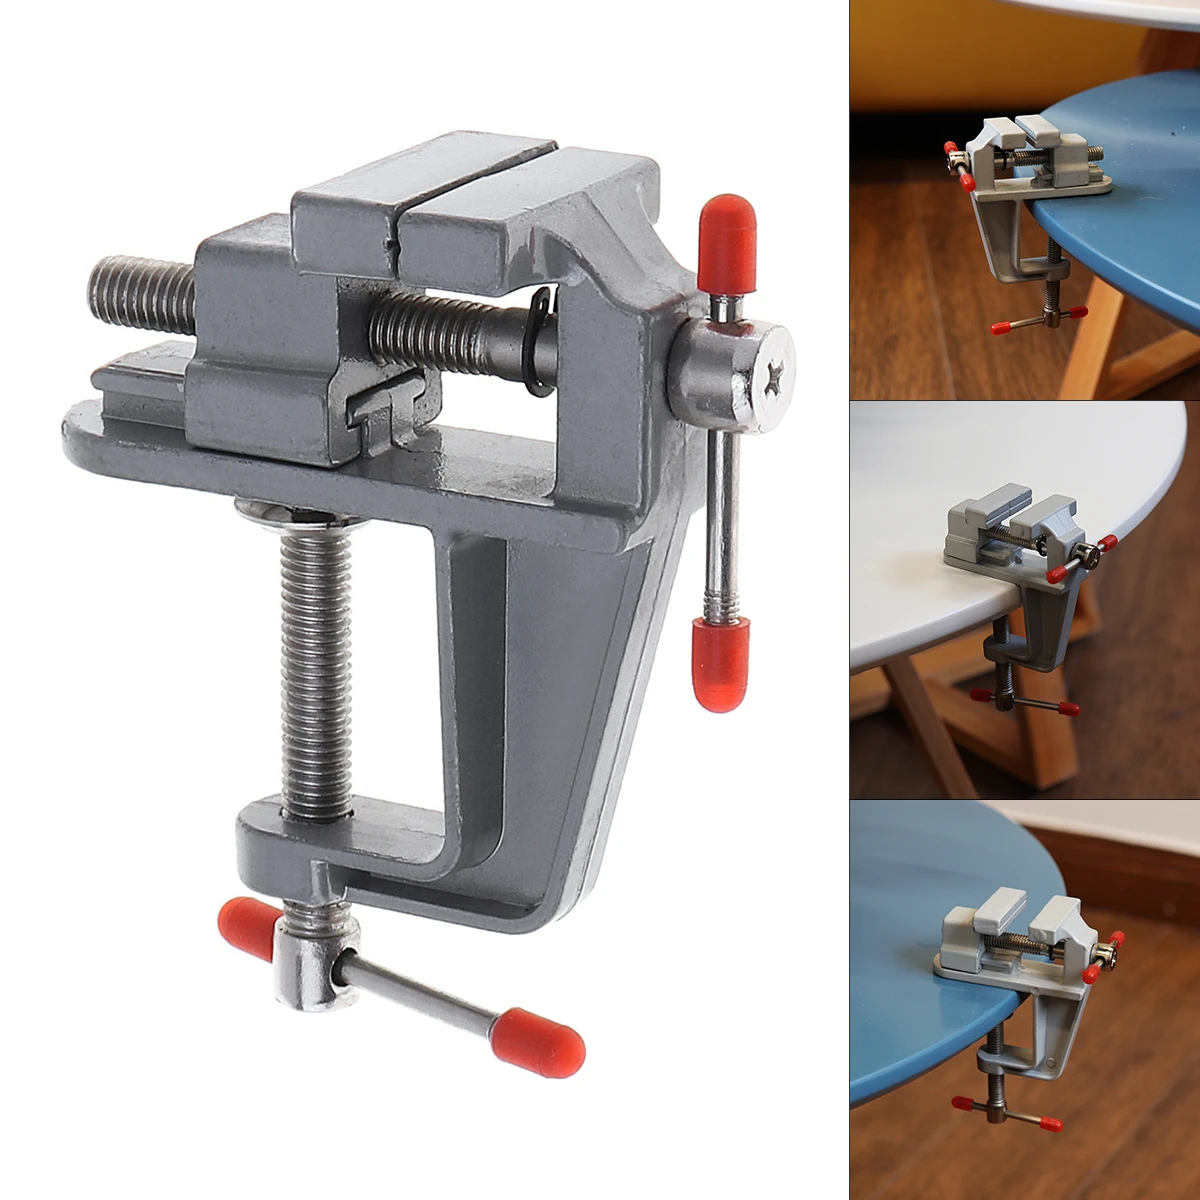 Details about   DIY Mini Jaw Bench Clamp Drill Press Vice Micro Clip For Clamping Table Tool